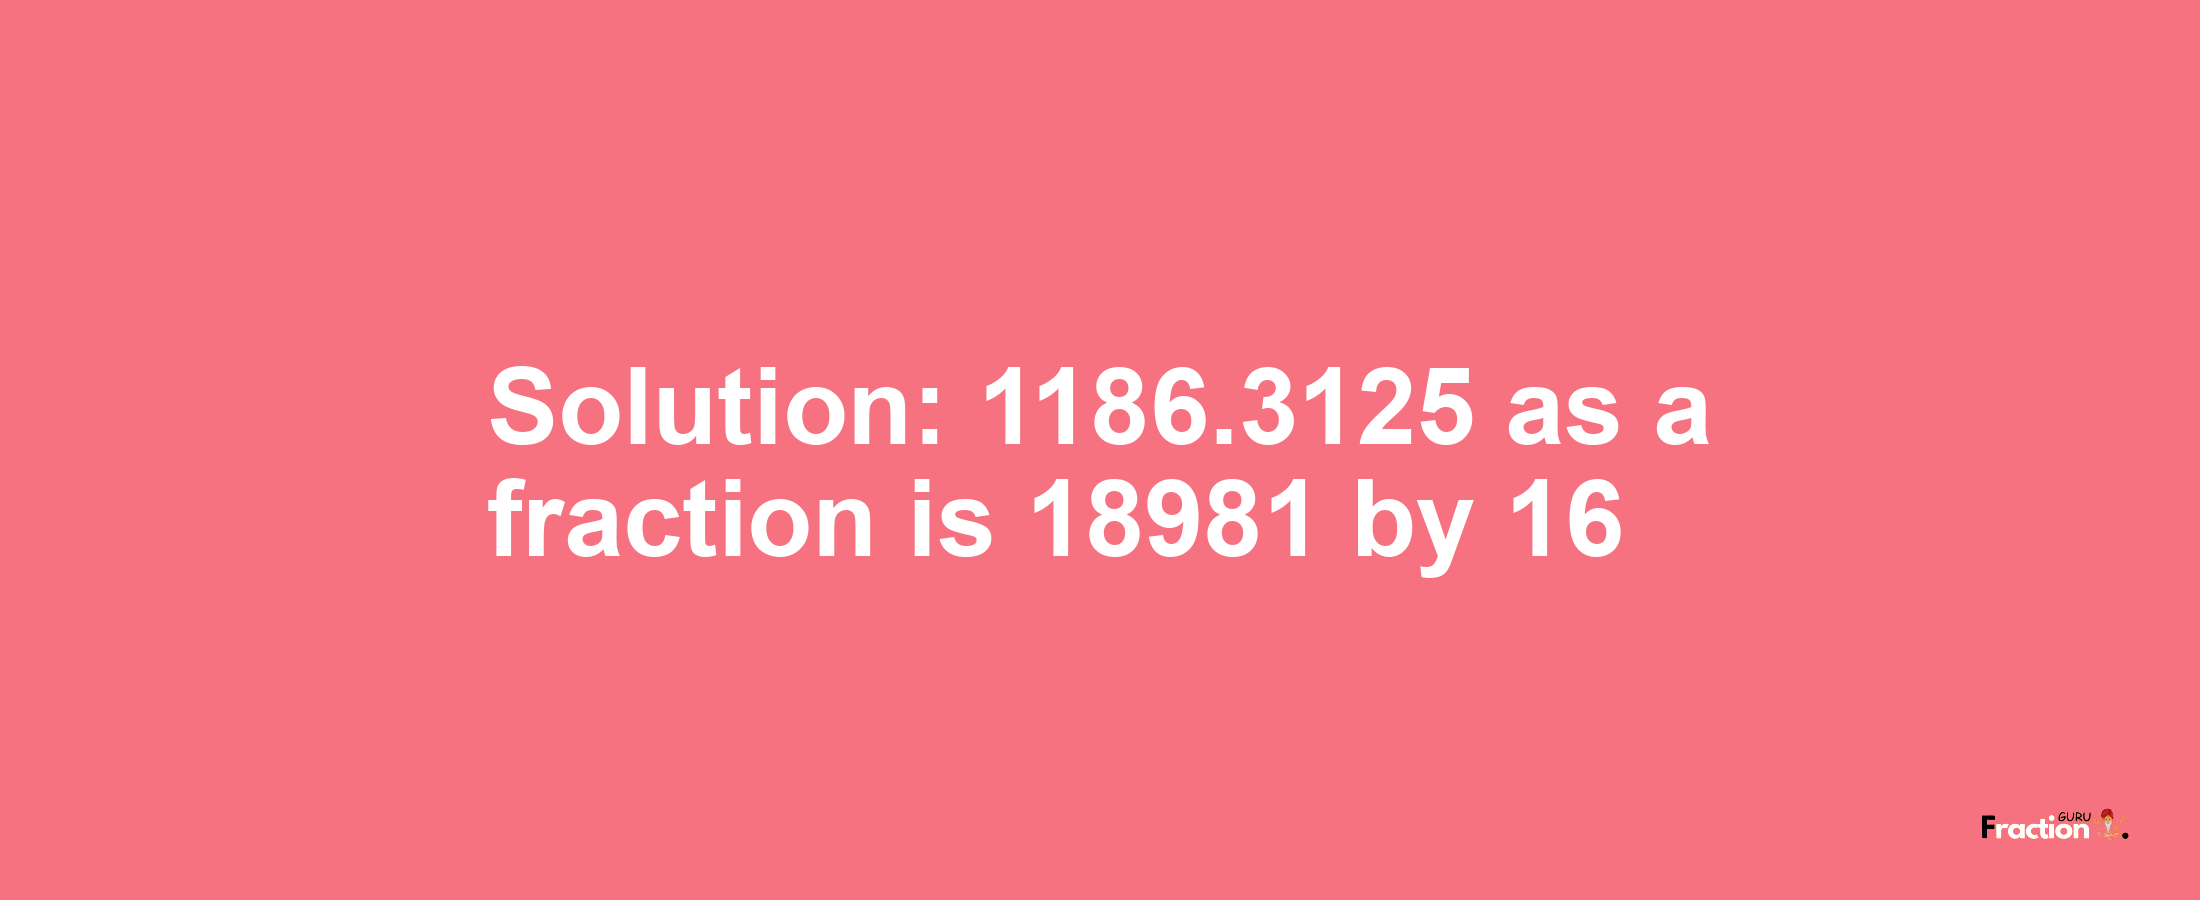 Solution:1186.3125 as a fraction is 18981/16